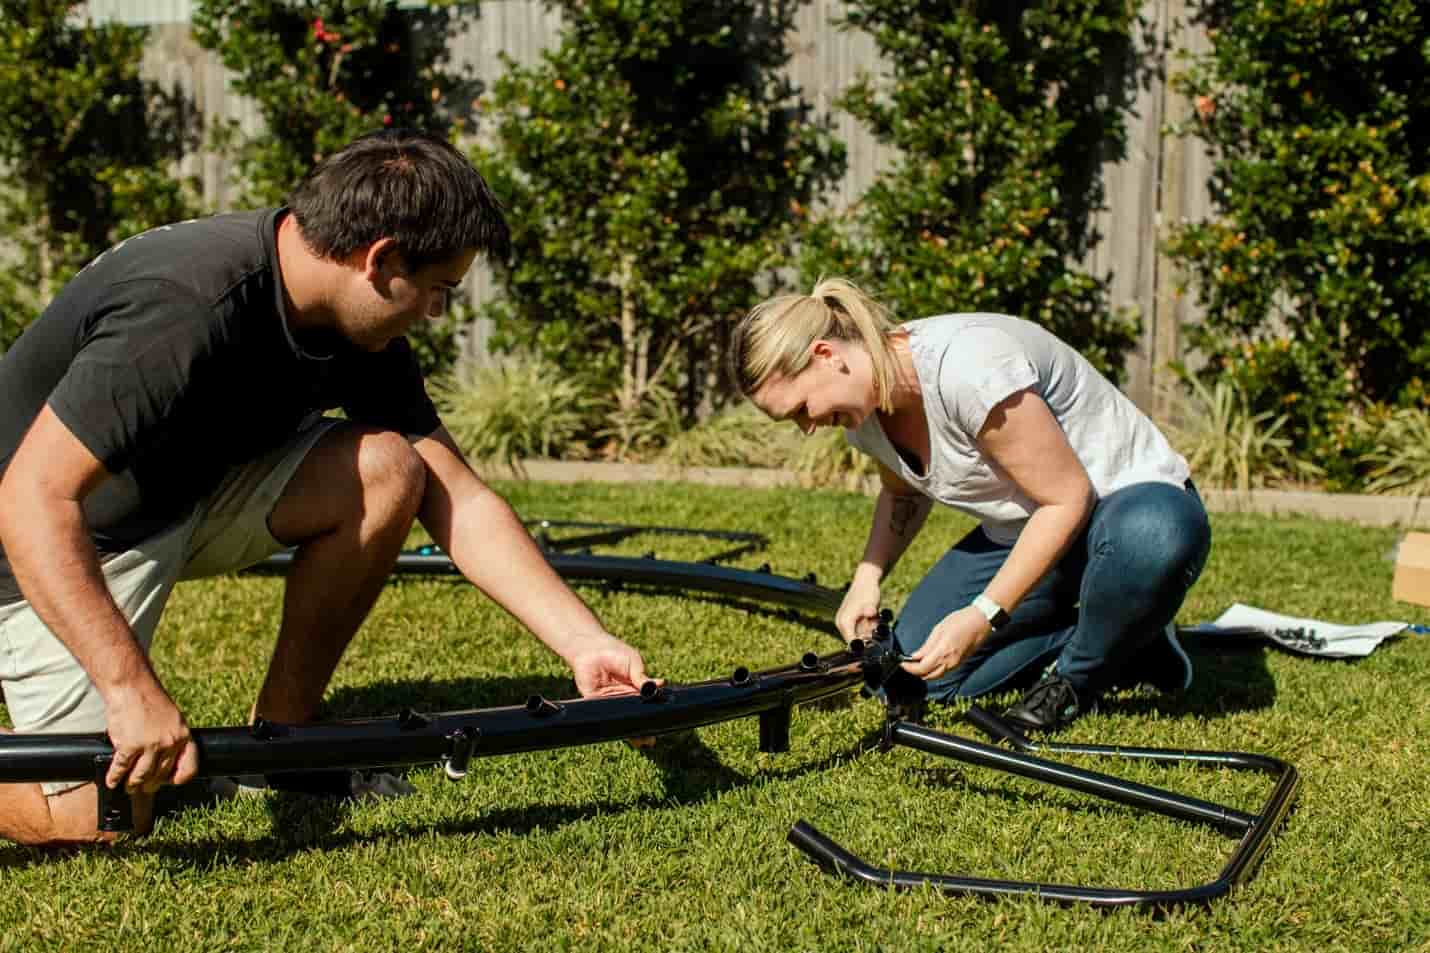 Two people installing a Springfree Trampoline.